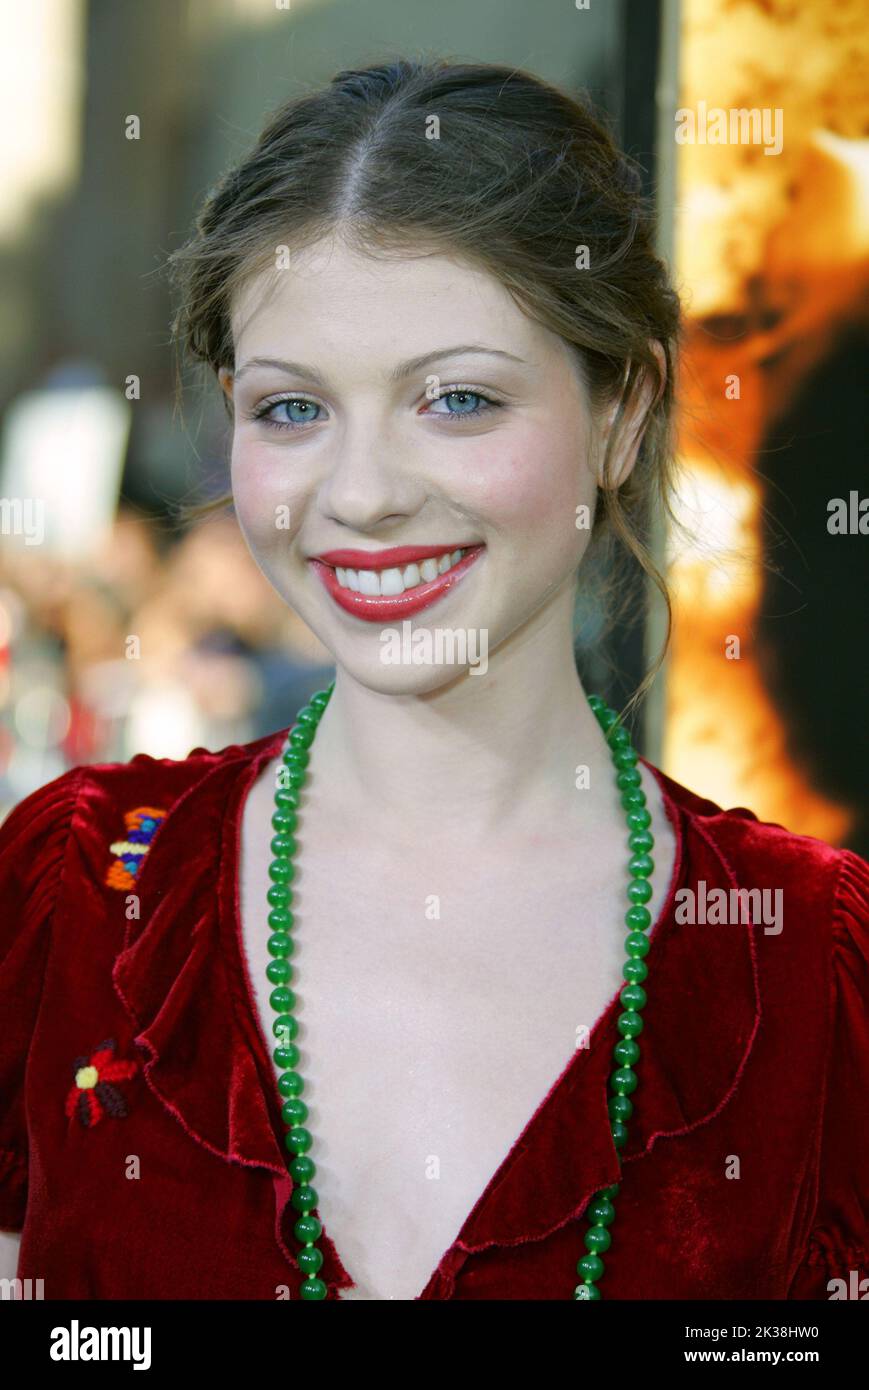 MICHELLE TRACHTENBERG ACTRESS BATMAN BEGINS CHINESE THEATRE, HOLLYWOOD LOS ANGELES, USA 06/06/2005 LAM51581 Stock Photo